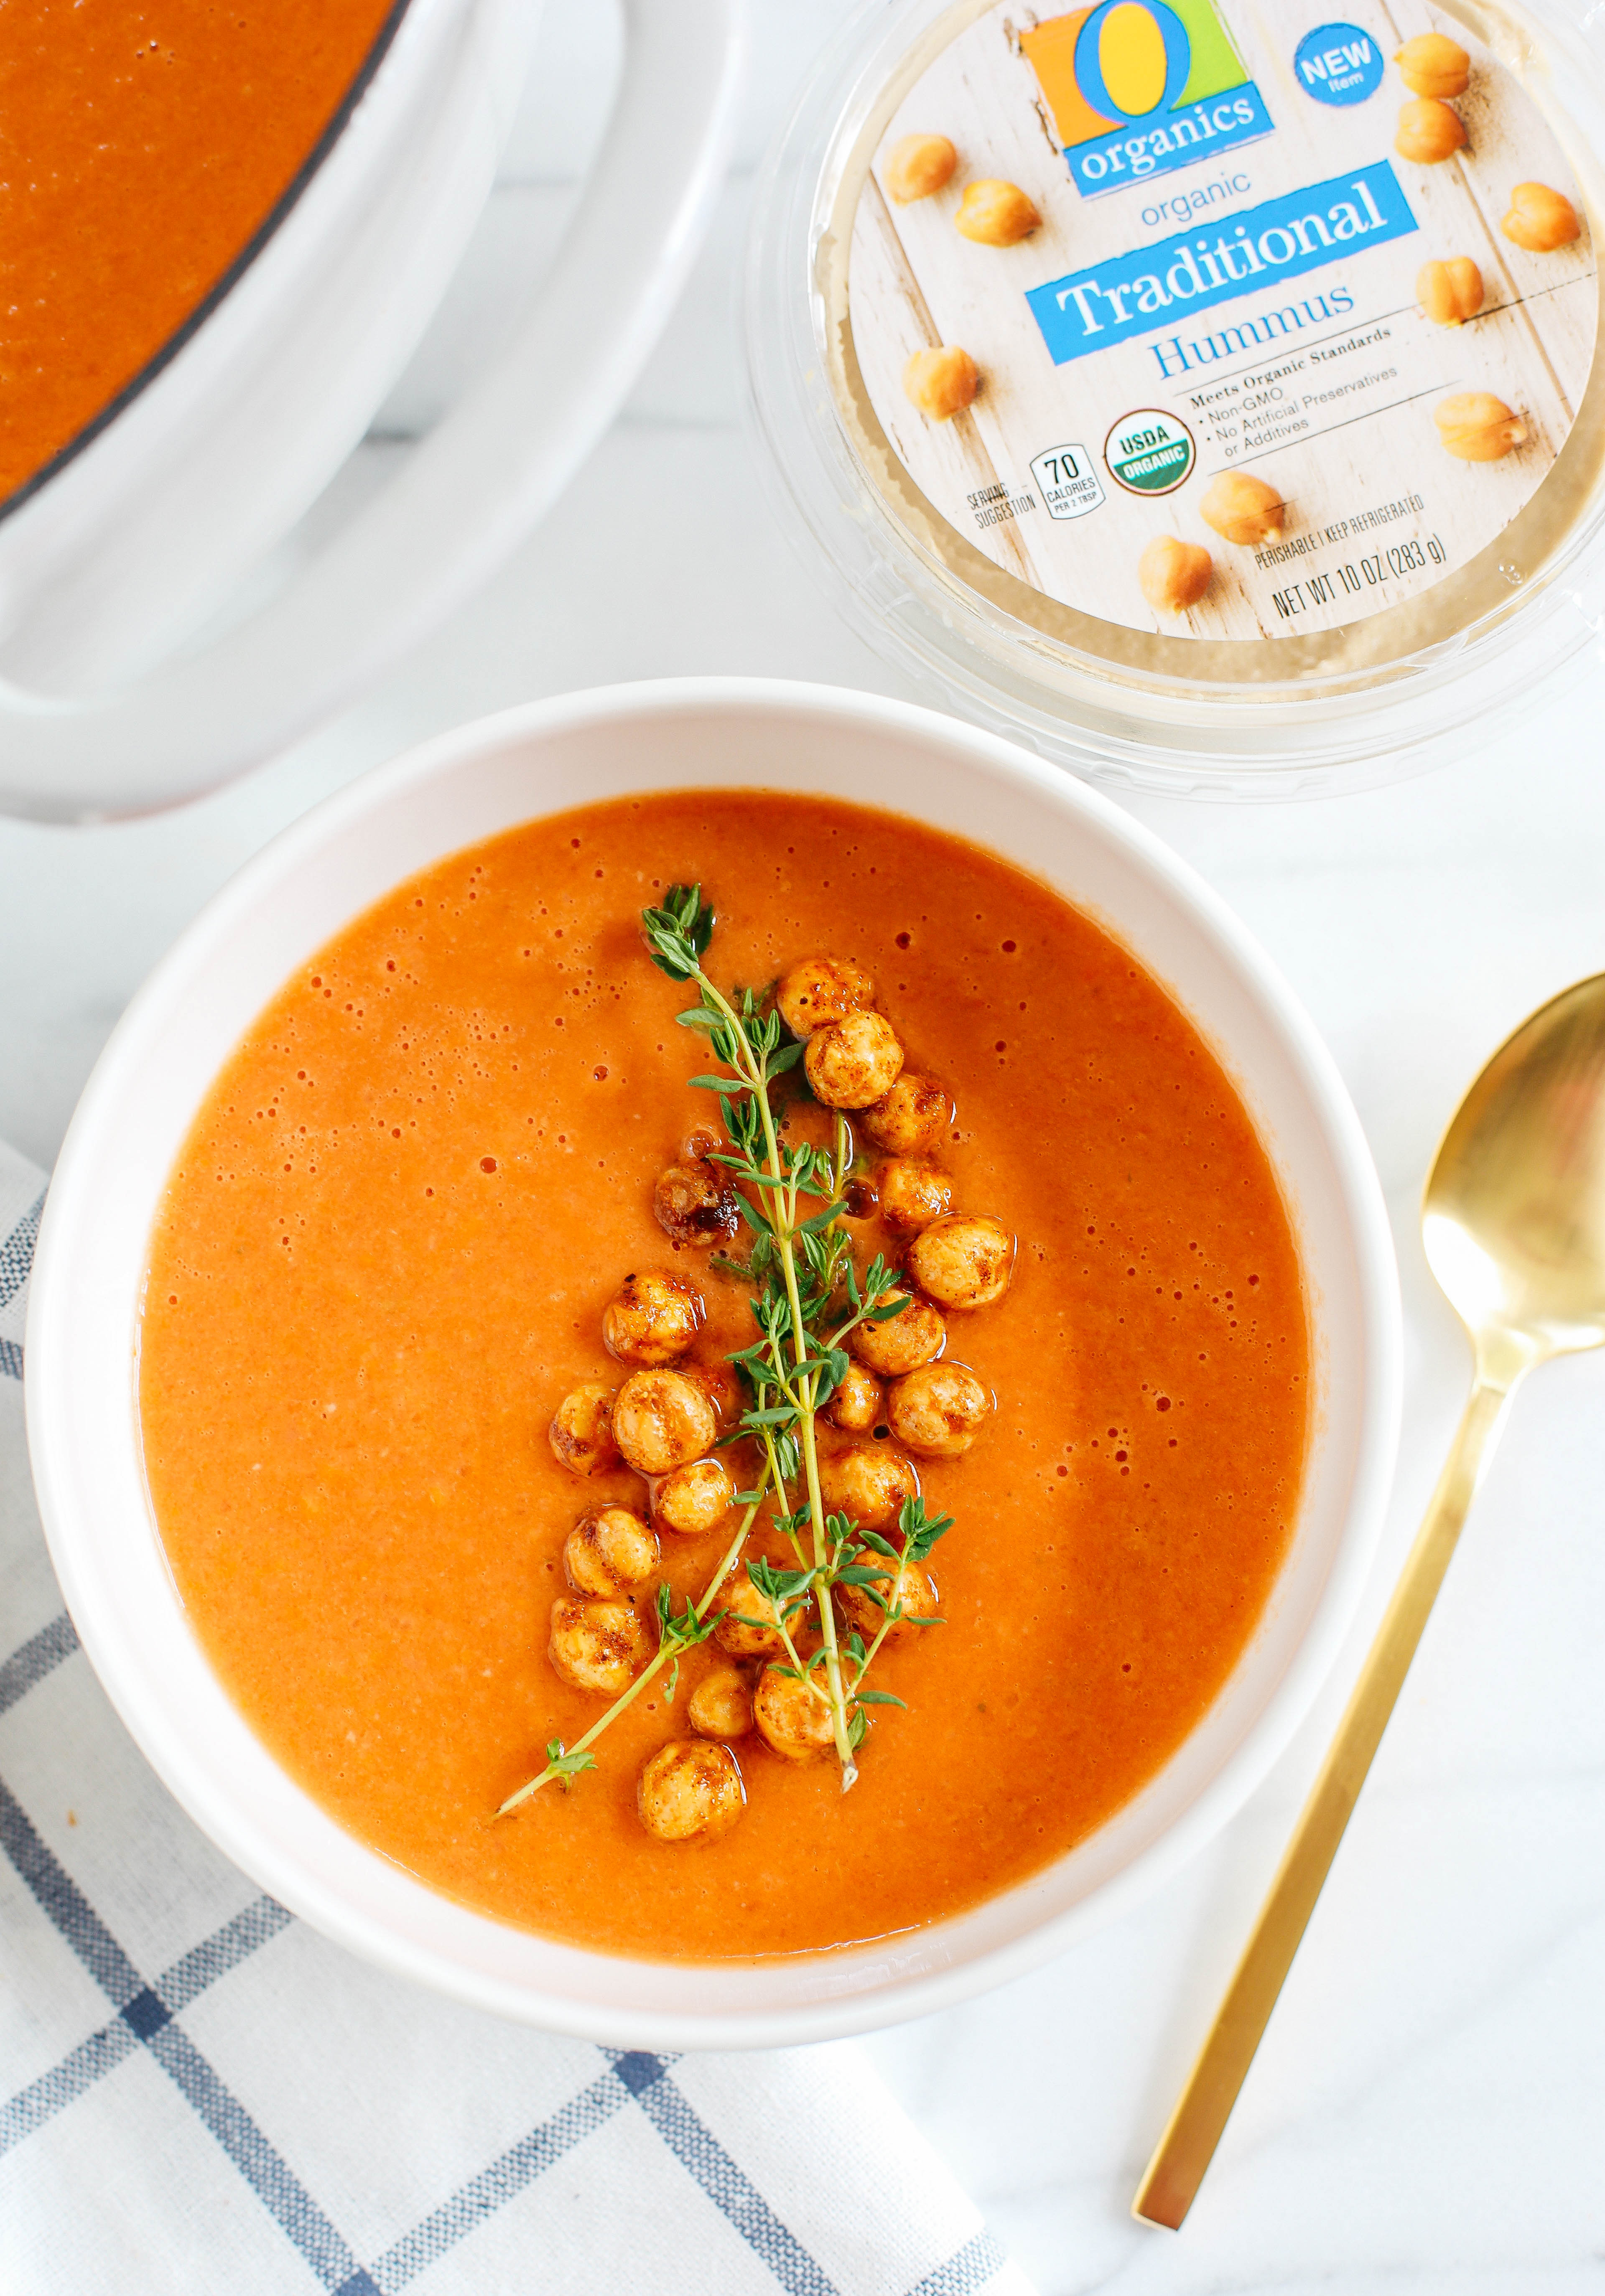 This Creamy Tomato Hummus Detox Soup is the perfect remedy for cold and flu season that is filled with tons of antioxidants and immune-boosting ingredients to keep you healthy all season long!